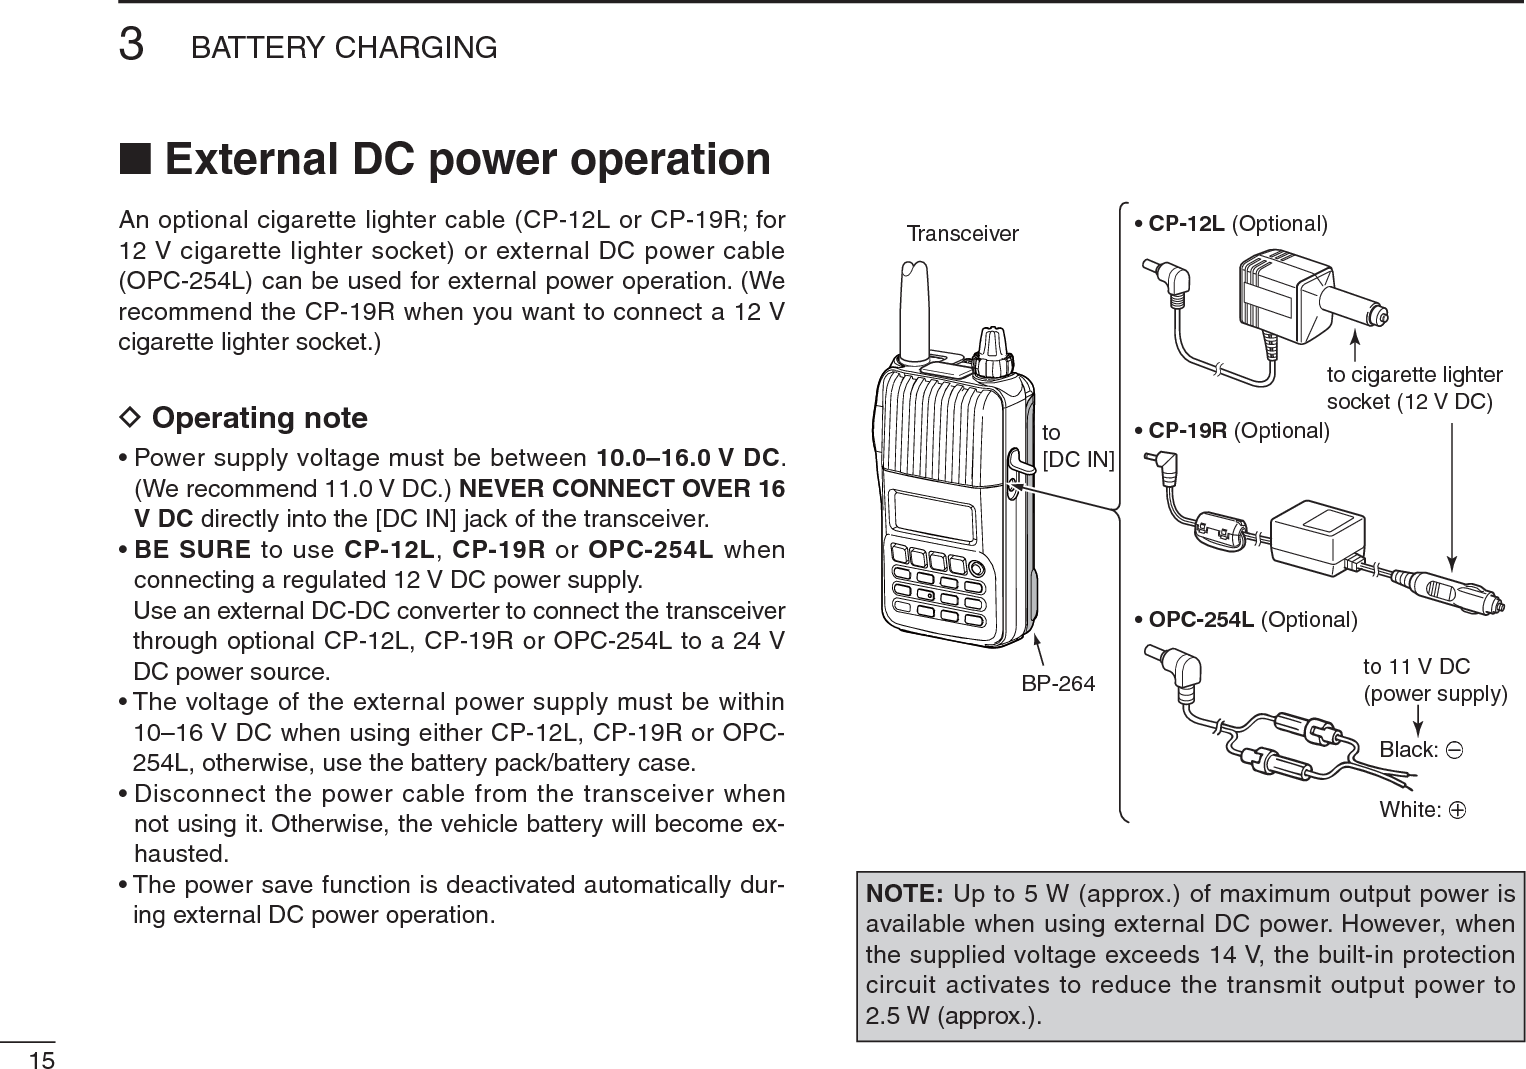 153BATTERY CHARGINGN External DC power operationAn optional cigarette lighter cable (CP-12L or CP-19R; for 12 V cigarette lighter socket) or external DC power cable (OPC-254L) can be used for external power operation. (We recommend the CP-19R when you want to connect a 12 V cigarette lighter socket.)D Operating note• Power supply voltage must be between 10.0–16.0 V DC. (We recommend 11.0 V DC.) NEVER CONNECT OVER 16 V DC directly into the [DC IN] jack of the transceiver.•BE SURE to use CP-12L, CP-19R or OPC-254L when connecting a regulated 12 V DC power supply.Use an external DC-DC converter to connect the transceiver through optional CP-12L, CP-19R or OPC-254L to a 24 VDC power source.• The voltage of the external power supply must be within 10–16 V DC when using either CP-12L, CP-19R or OPC-254L, otherwise, use the battery pack/battery case.• Disconnect the power cable from the transceiver when not using it. Otherwise, the vehicle battery will become ex-hausted.• The power save function is deactivated automatically dur-ing external DC power operation.TransceiverBP-264• CP-12L (Optional)• CP-19R (Optional)• OPC-254L (Optional)to cigarette lightersocket (12 V DC)to 11 V DC(power supply)White: +Black: _to[DC IN]NOTE: Up to 5 W (approx.) of maximum output power is available when using external DC power. However, when the supplied voltage exceeds 14 V, the built-in protection circuit activates to reduce the transmit output power to 2.5 W (approx.).